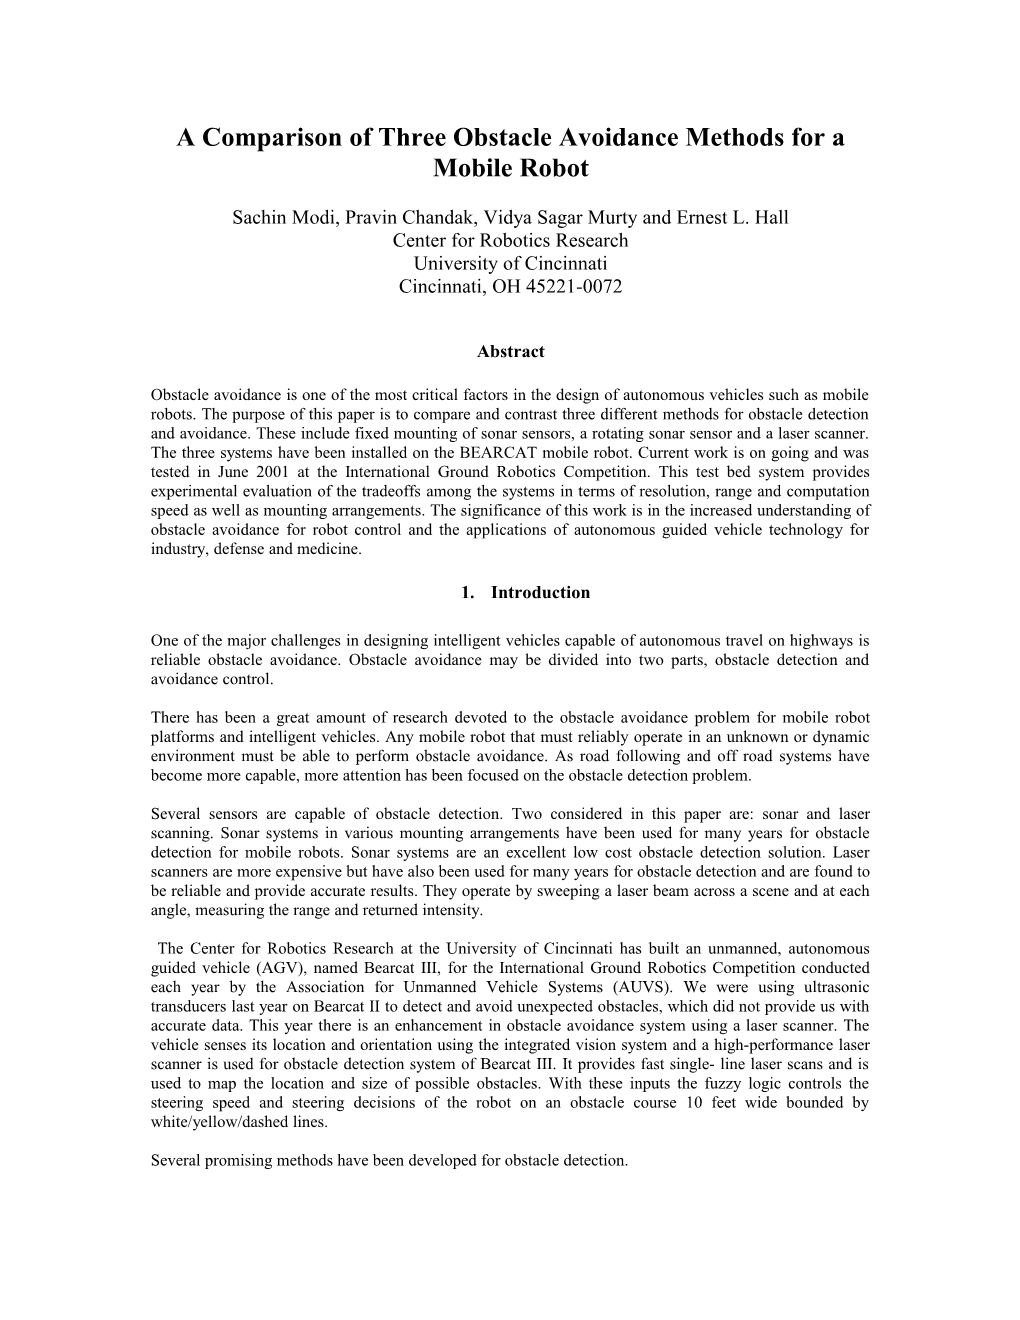 A Comparison Of Three Obstacle Avoidance Methods For A Mobile Robot